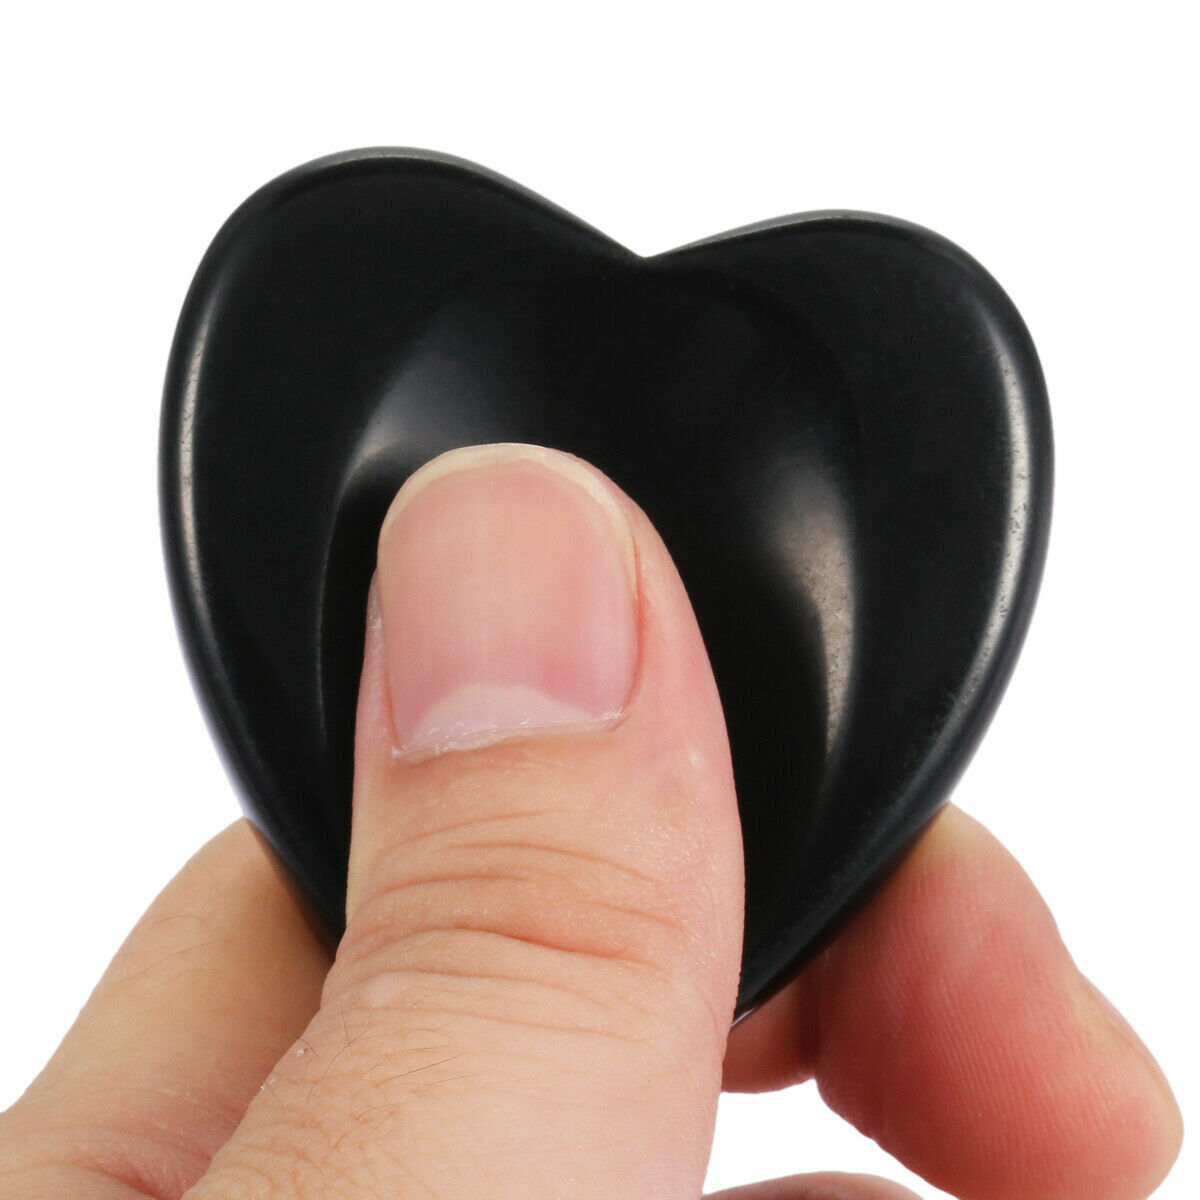 Healing Crystal Heart Thumb Worry Stone Pocket Palm Gemstone for Reiki Anxiety